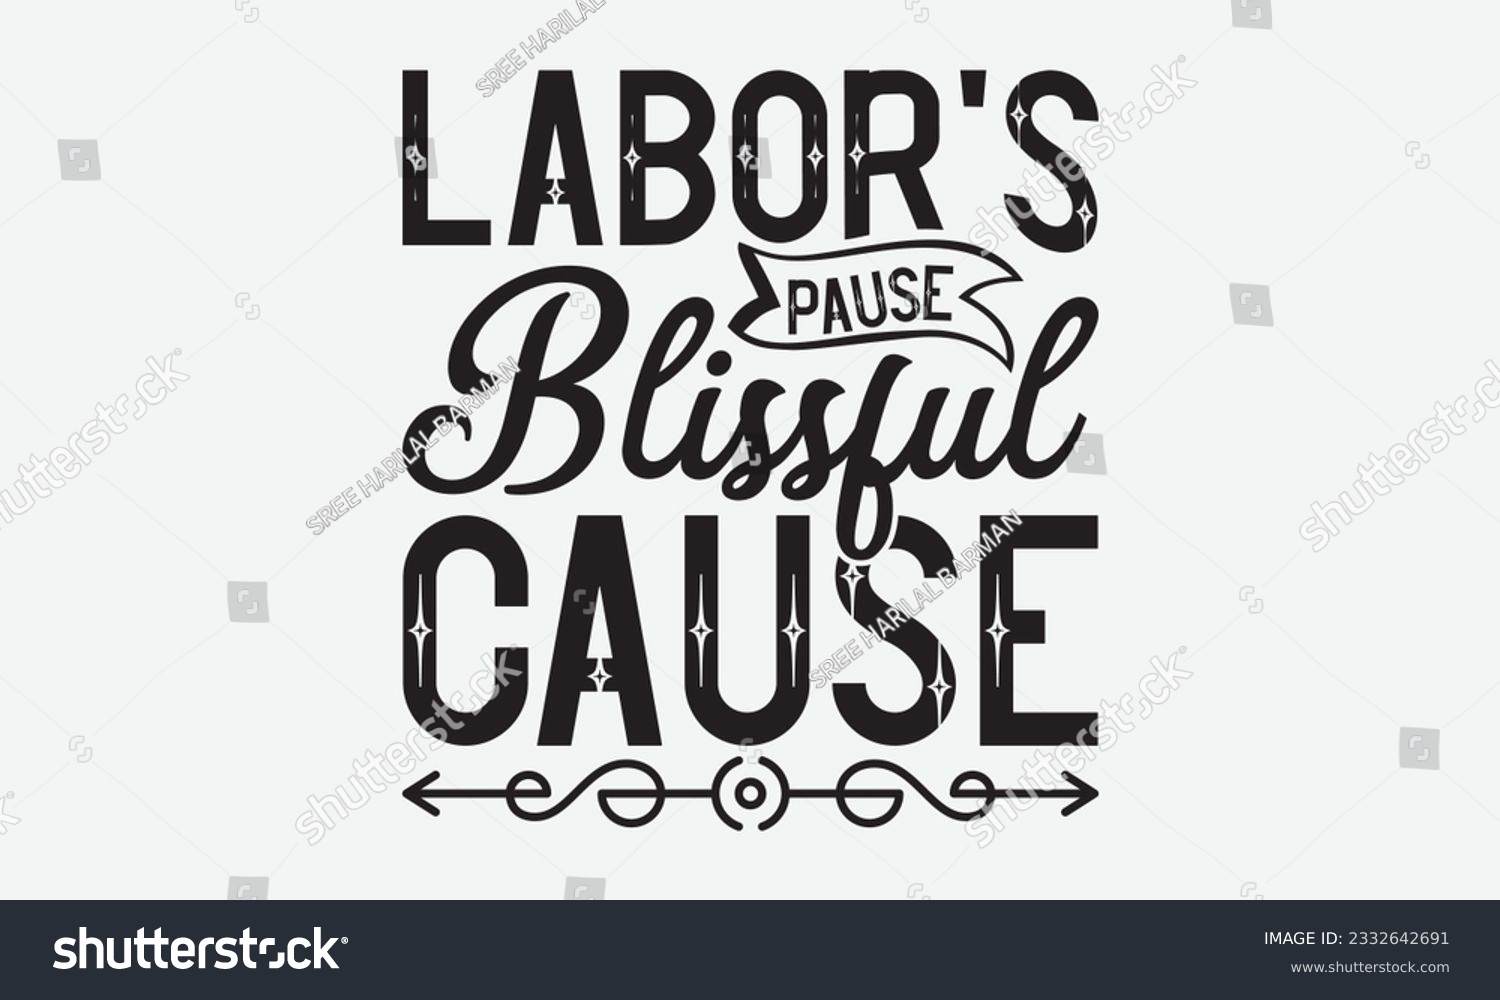 SVG of Labor's Pause Blissful Cause - Labor svg typography t-shirt design. celebration in calligraphy text or font Labor in the Middle East. Greeting cards, templates, and mugs. EPS 10. svg